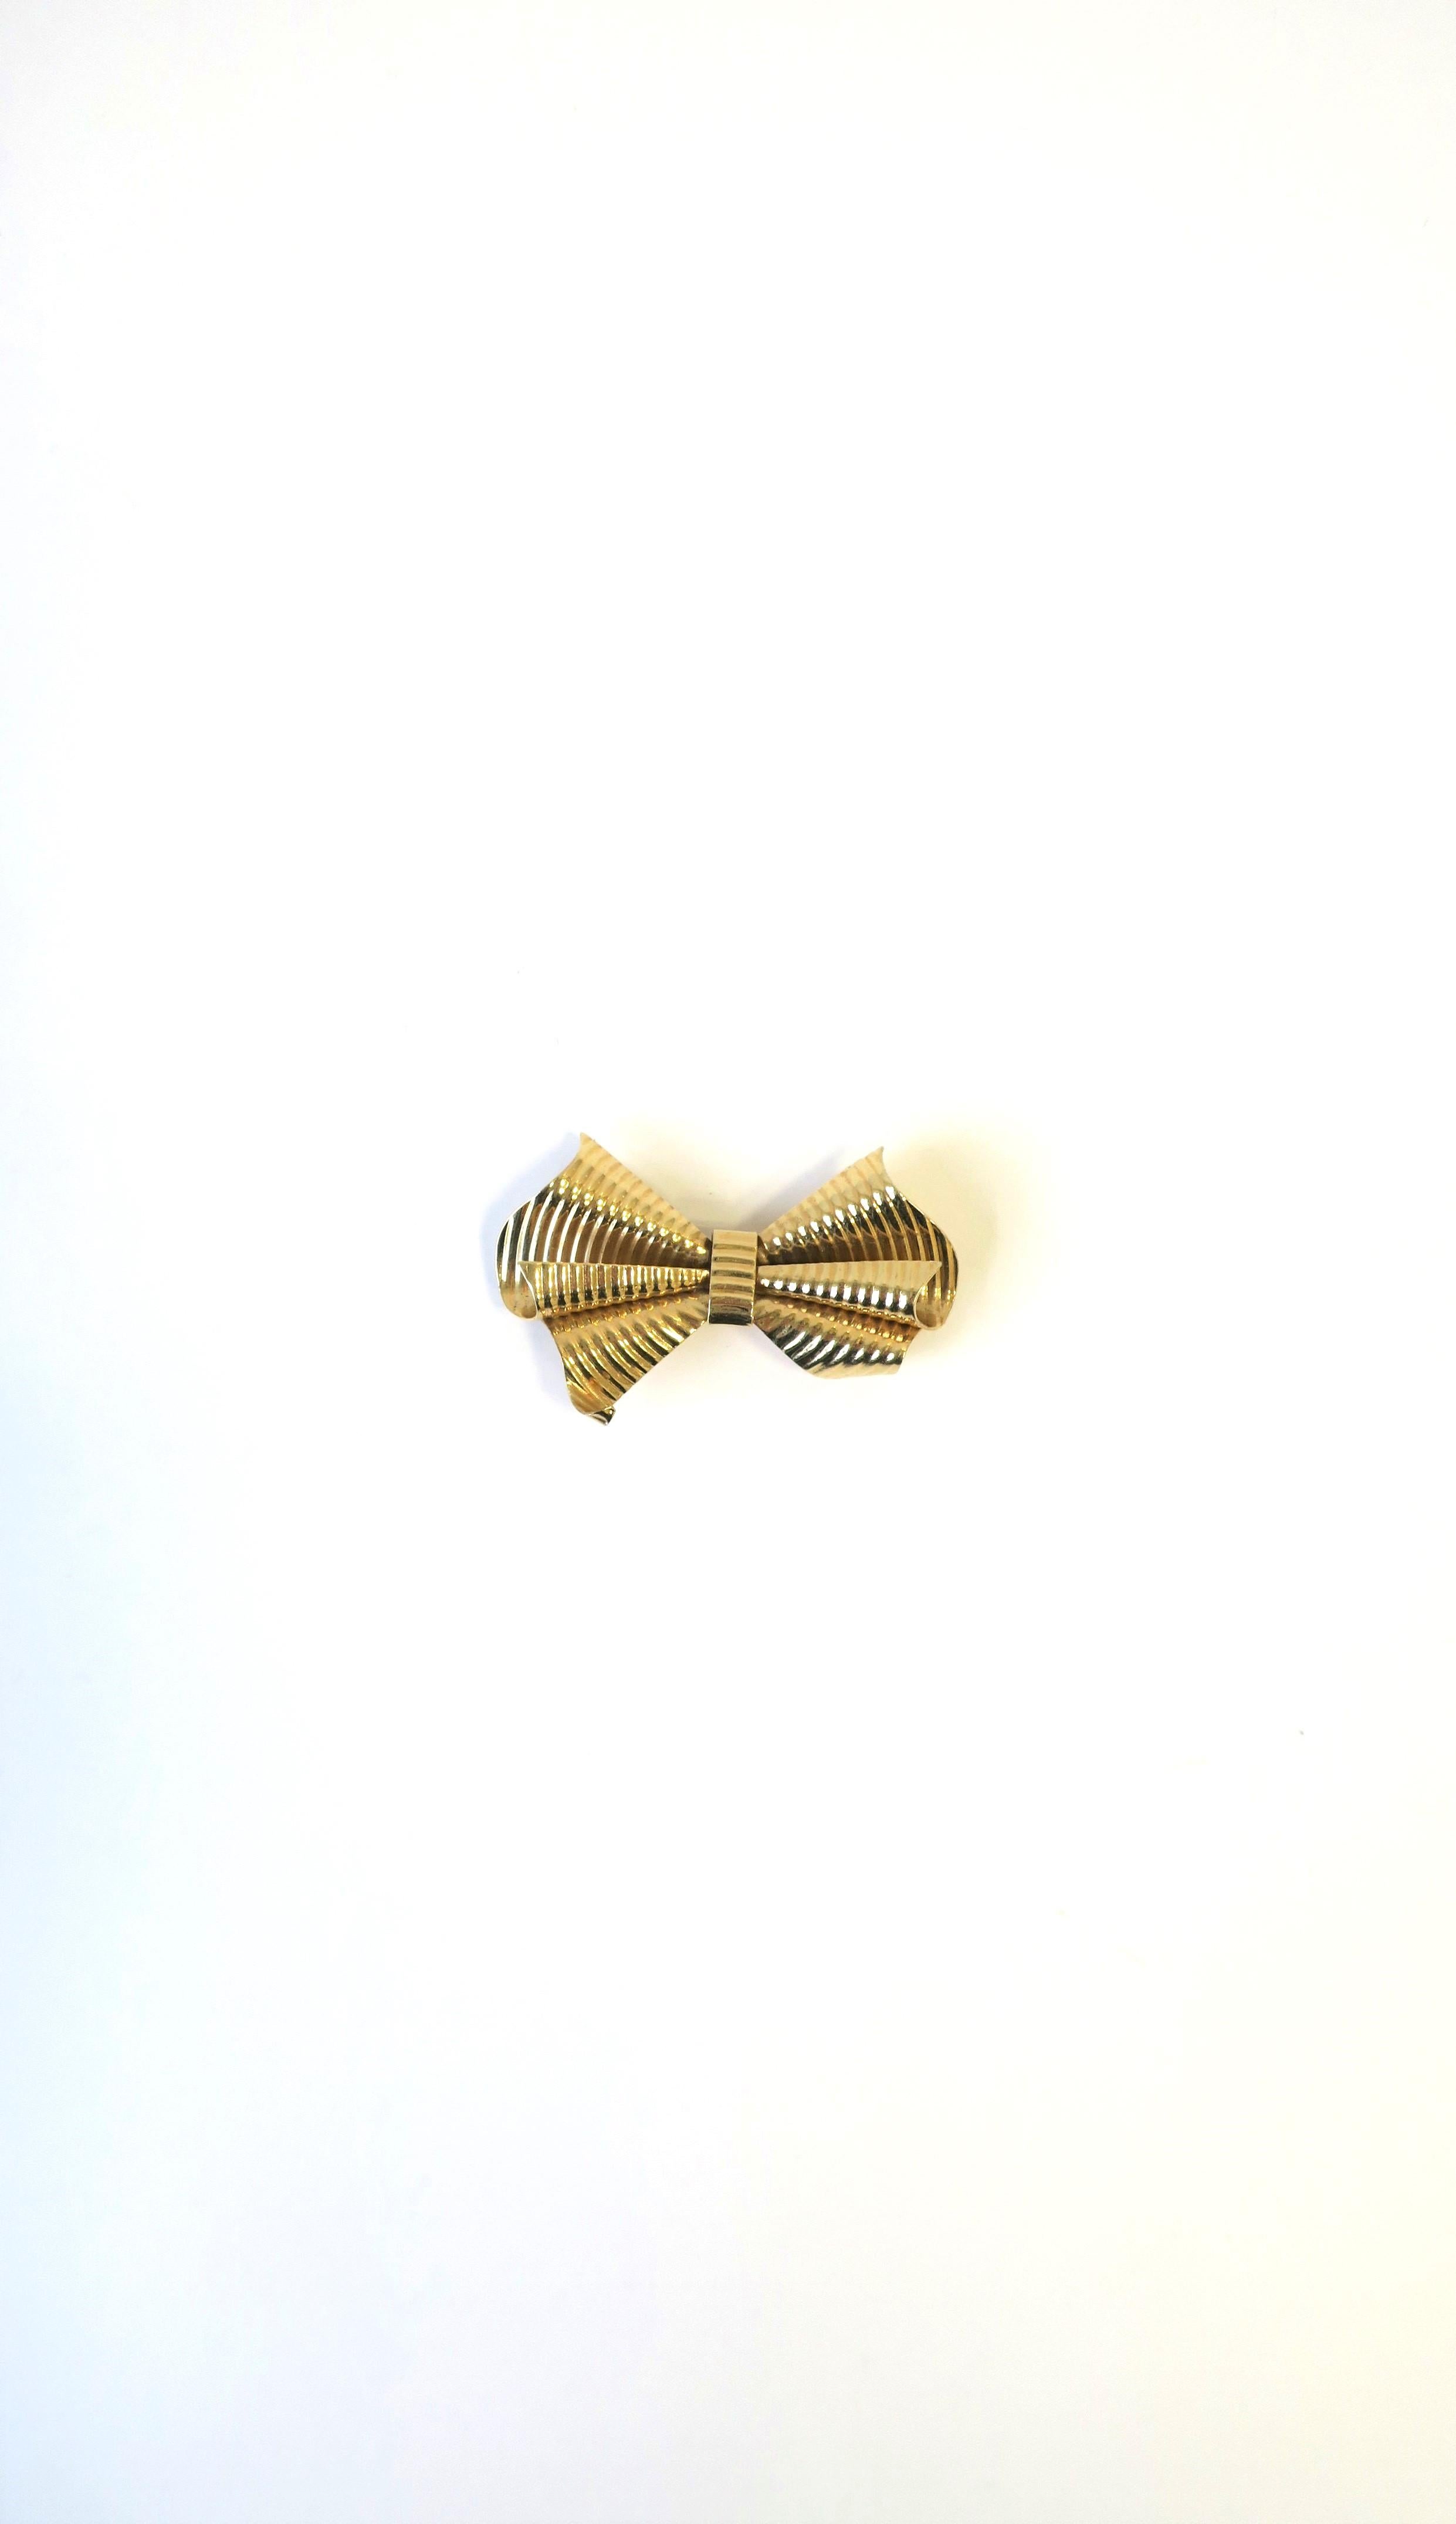 A very beautiful 14-karat yellow gold bow pin brooch from luxury jeweler Tiffany & Co. New York. Brooch is marked '14kt' on back center as shown in second to last image. Brooch is marked 'Tiffany' on pin bar on back as shown in last image. A great